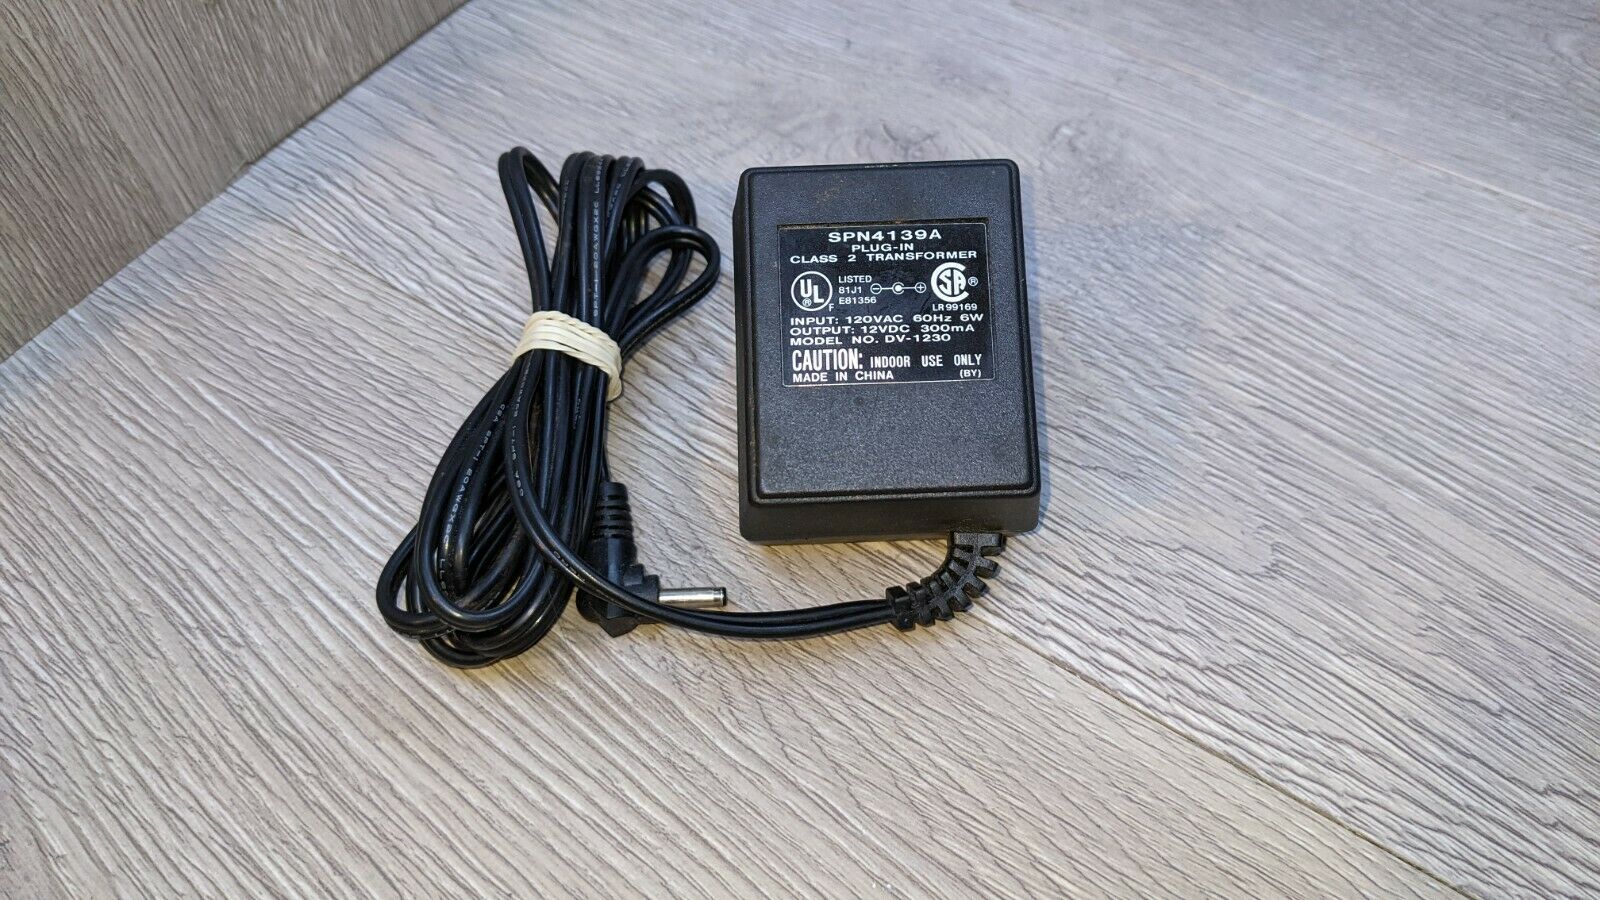 SPN 4139A AC to DC Power Supply Adaptor Charger 12V DC 300mA Model AD-1230 Connection Split/Dupli